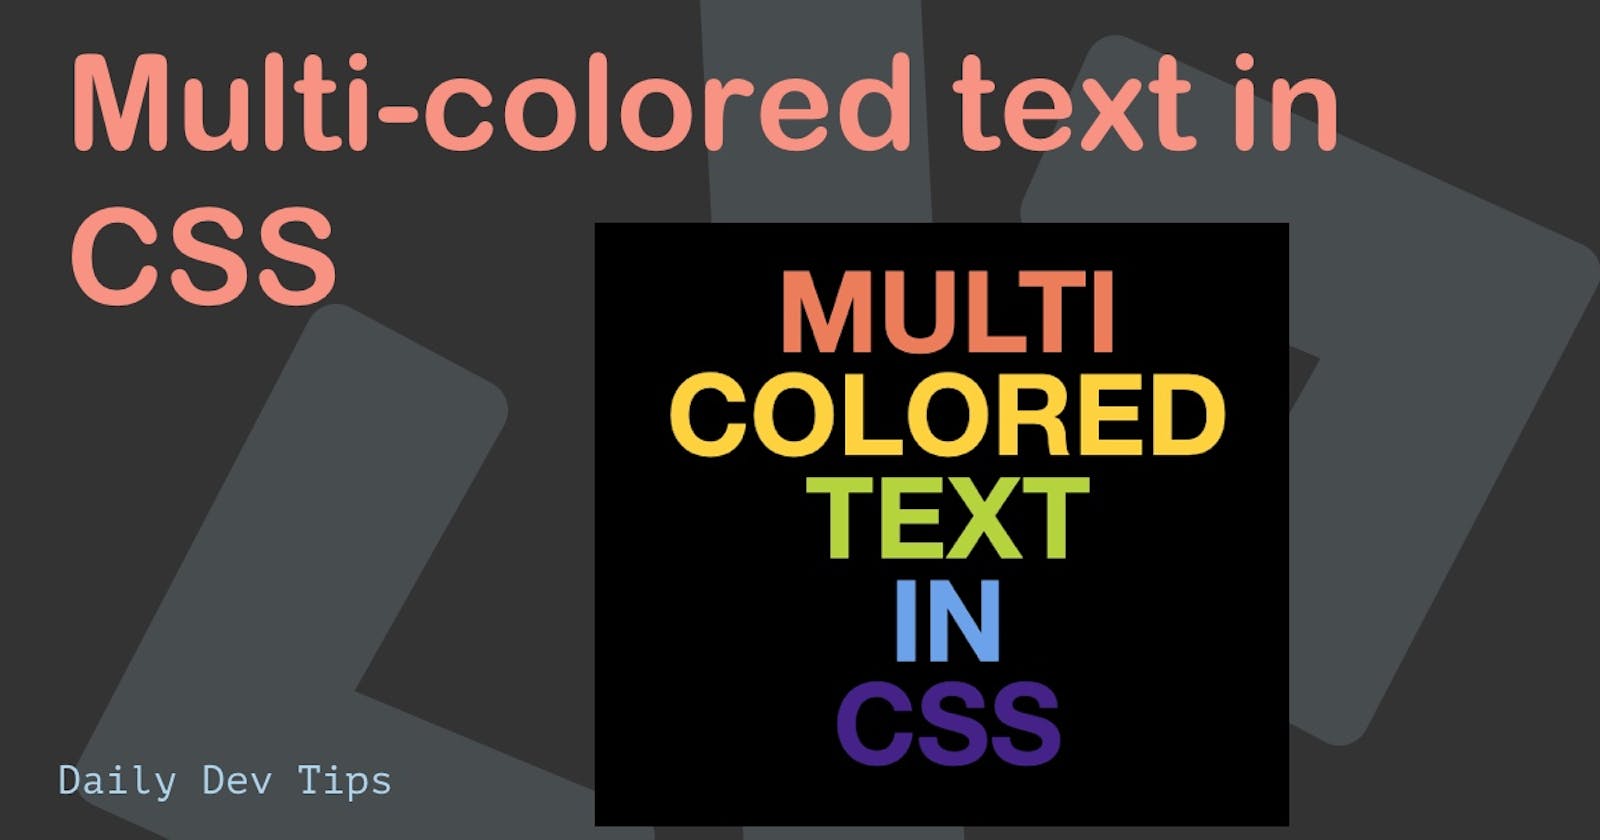 Multi-colored text in CSS